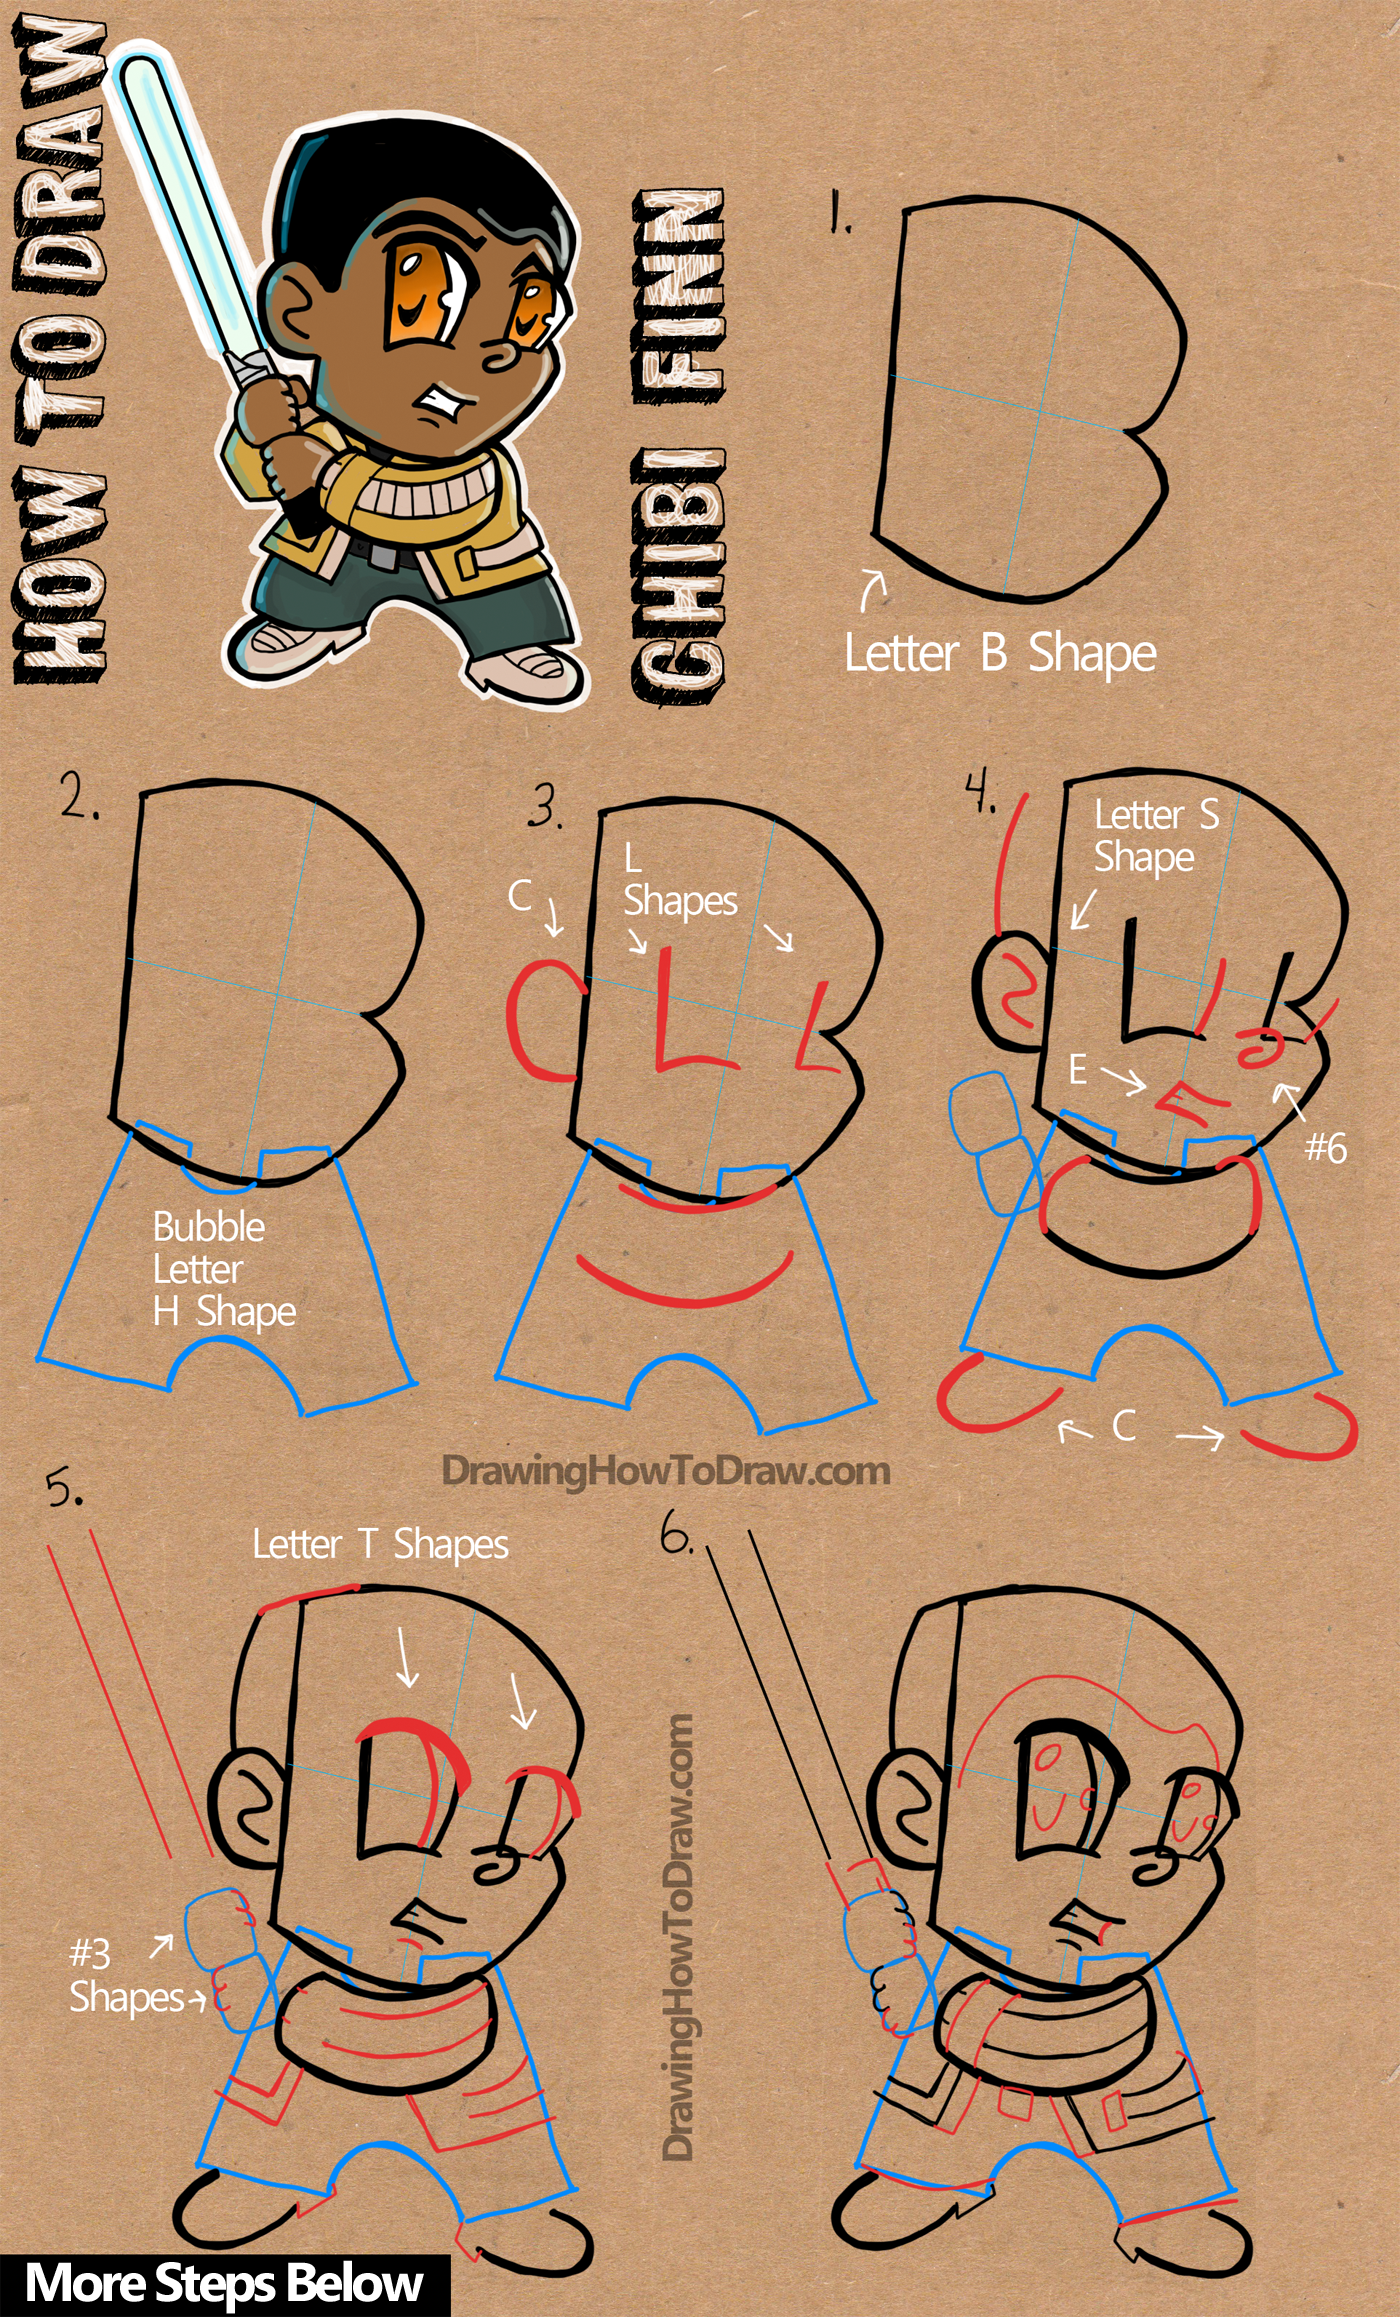 How to Draw Chibi Cartoon Finn from Star Wars The Force Awakens Step by Step Drawing Tutorial